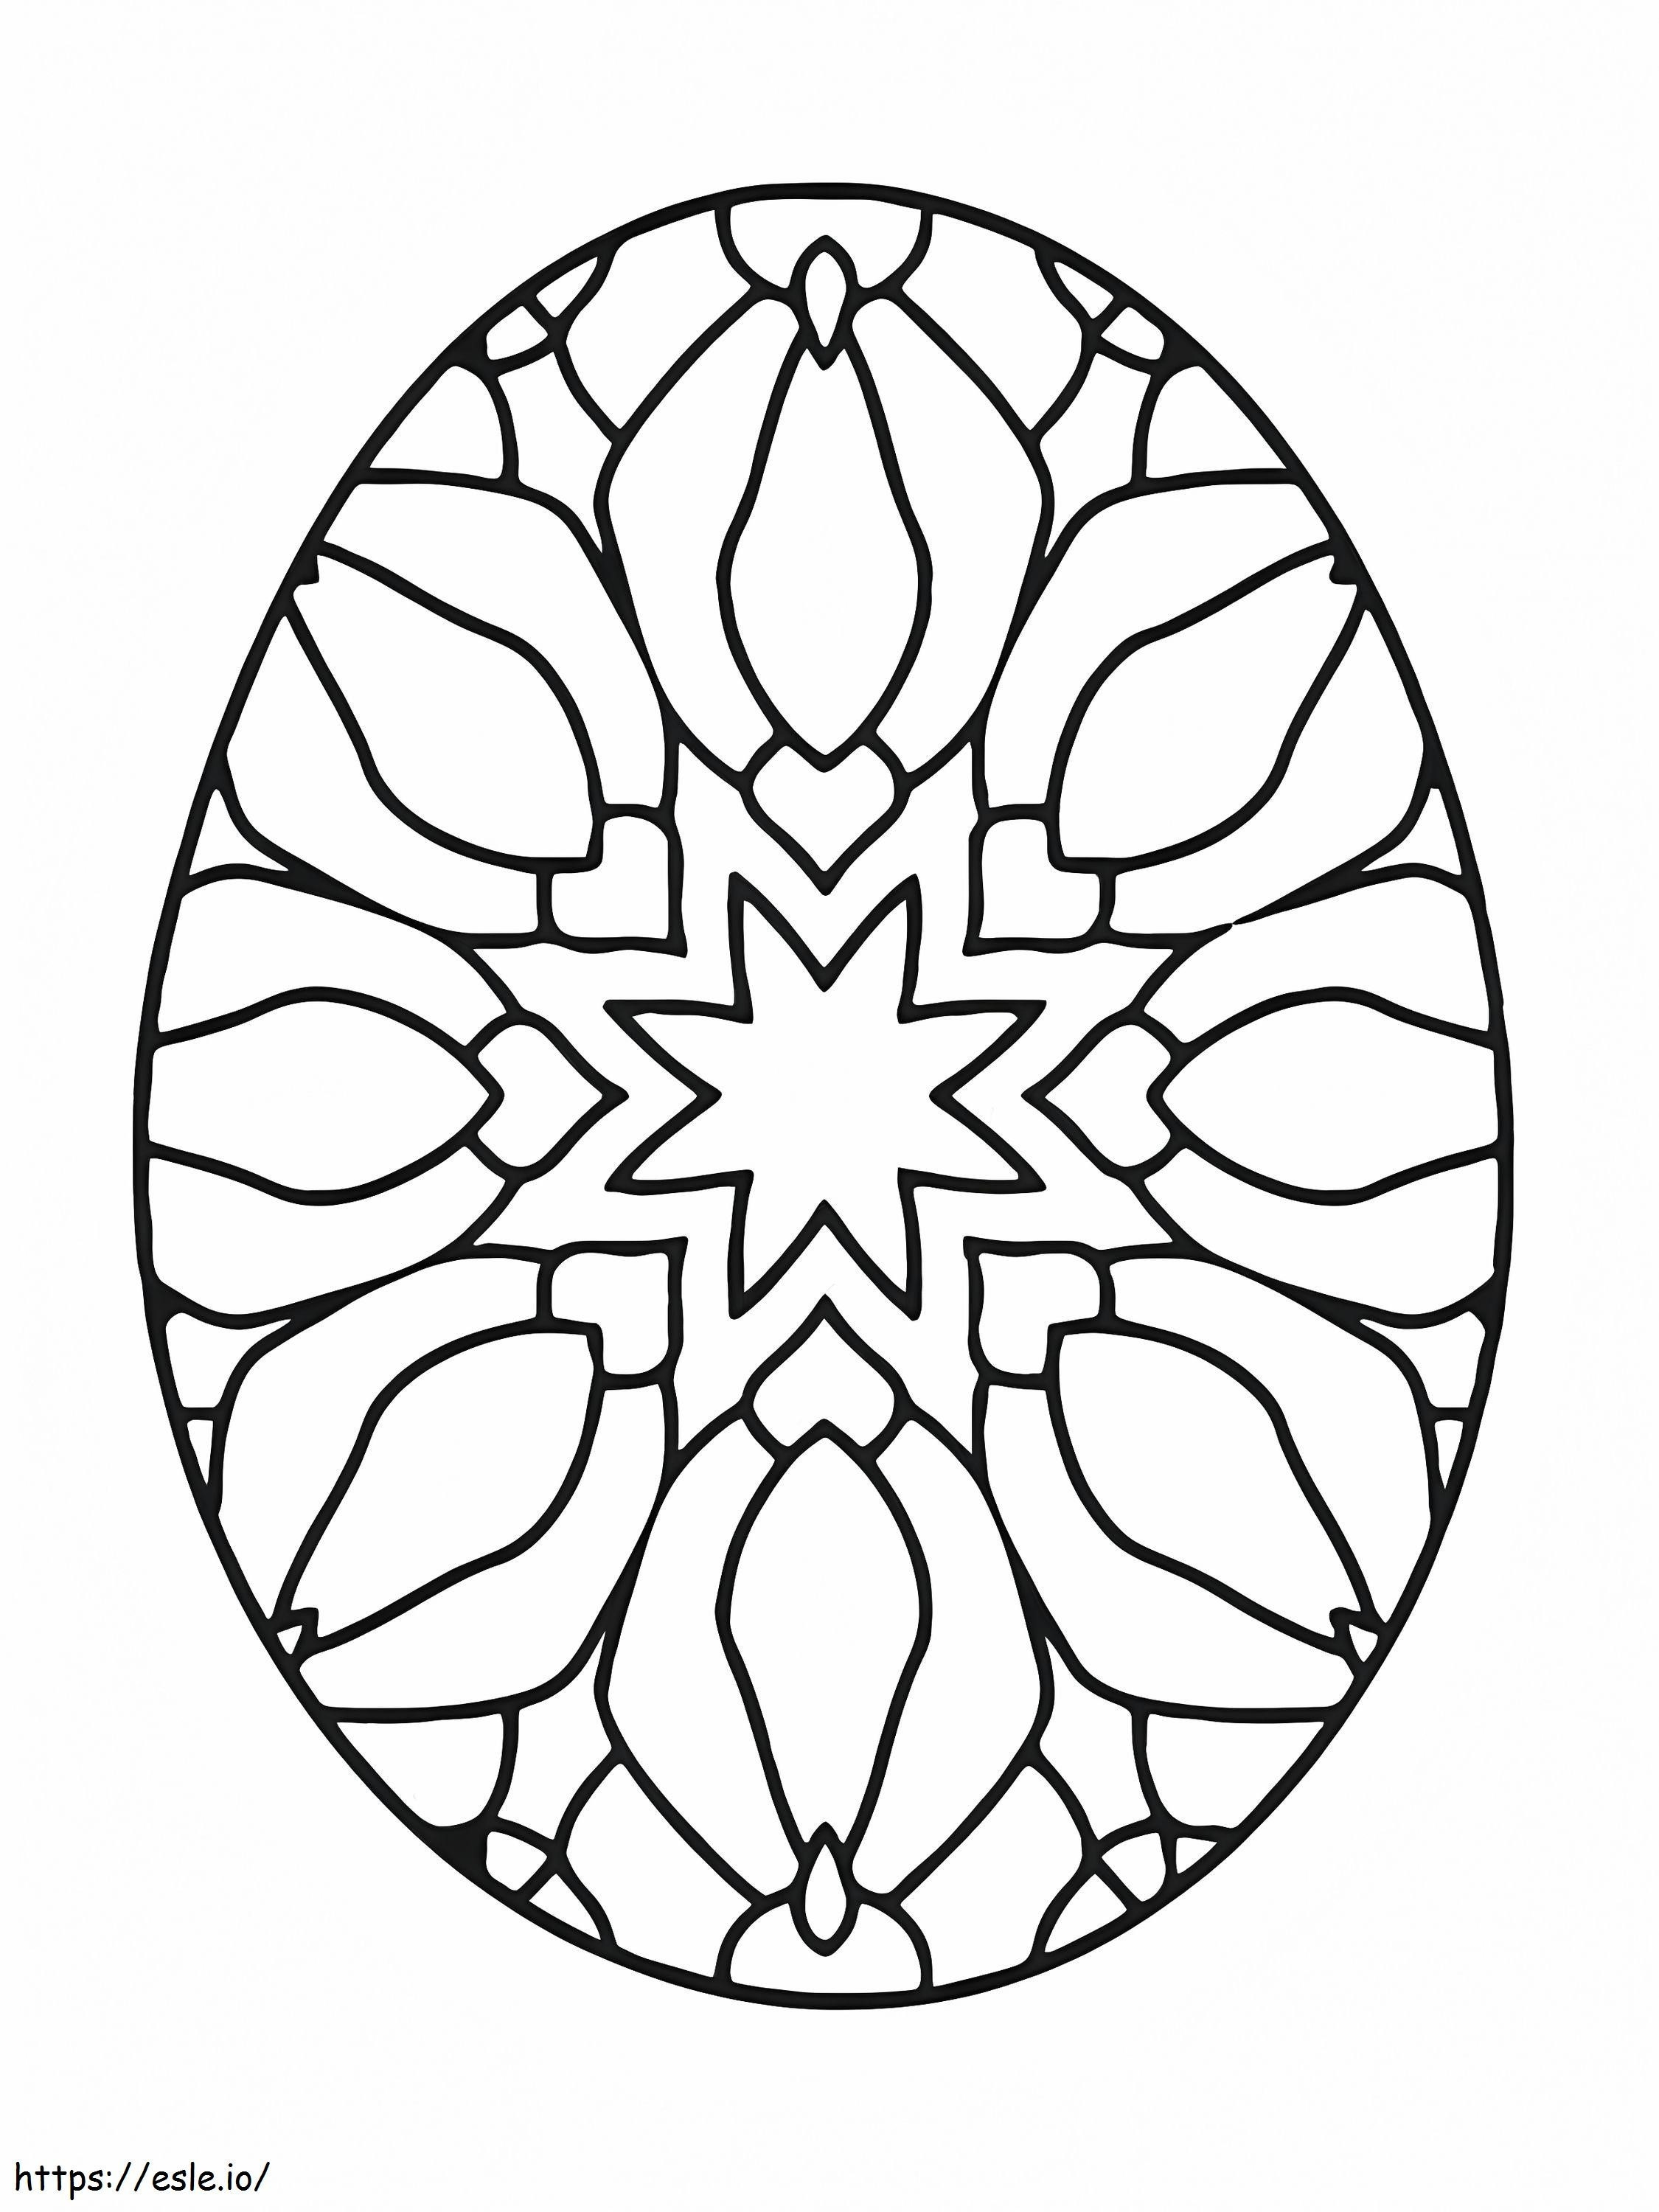 Charming Easter Egg coloring page